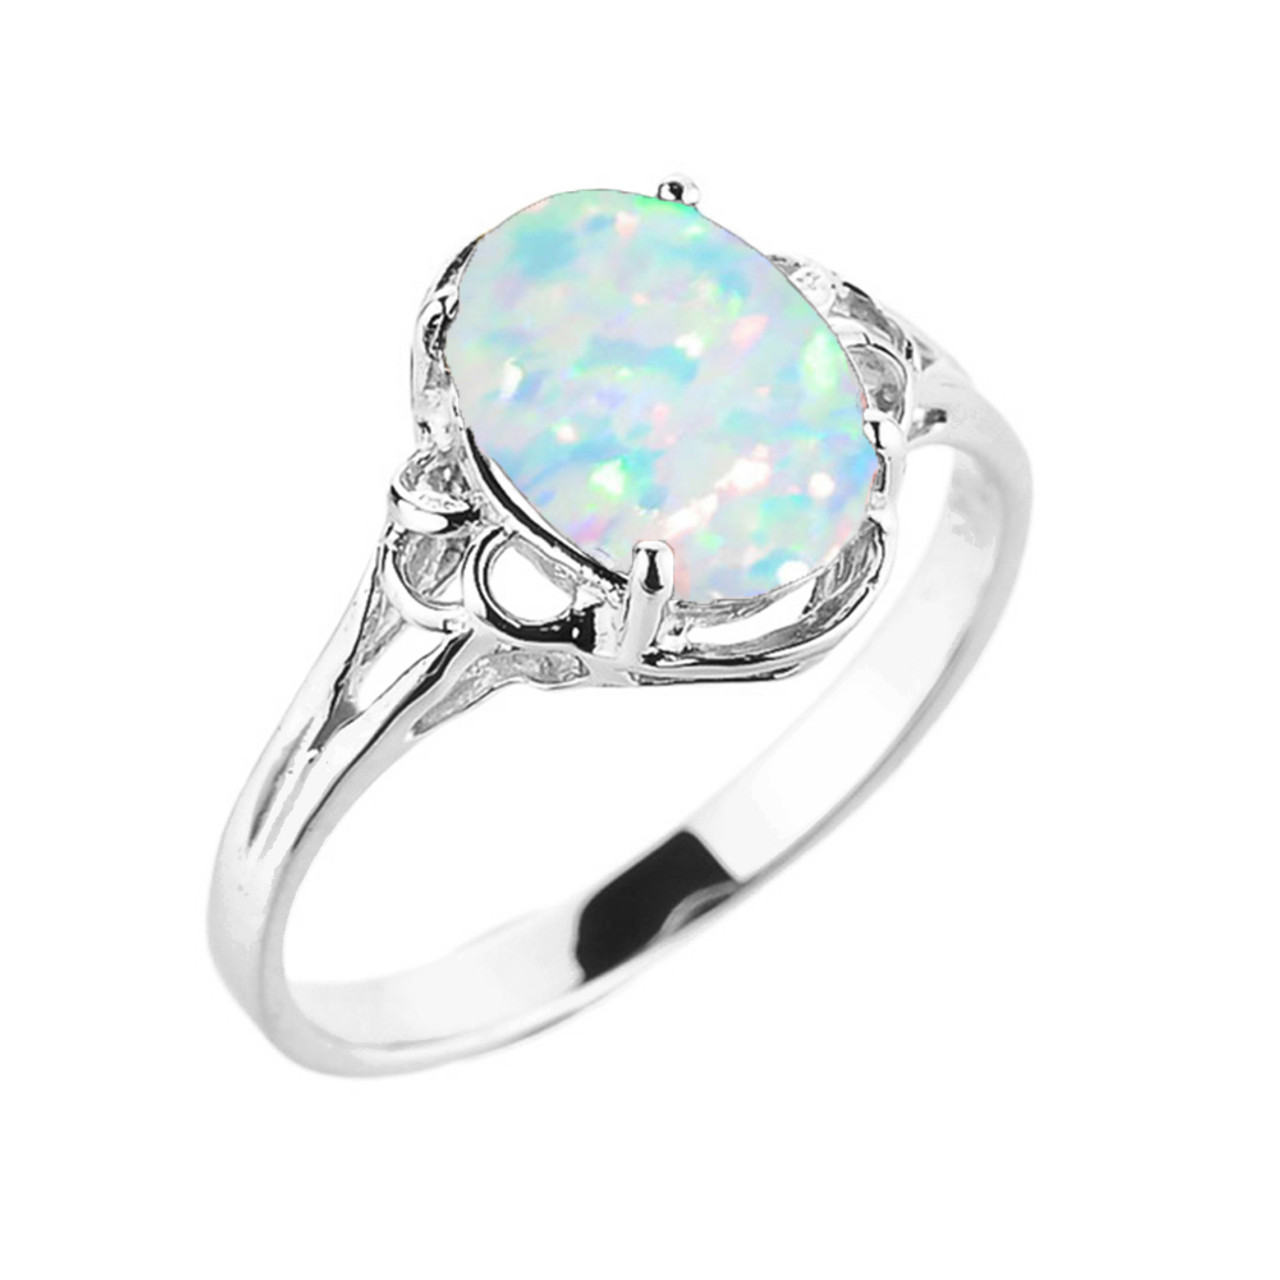 White Gold Simulated Opal Gemstone Ring